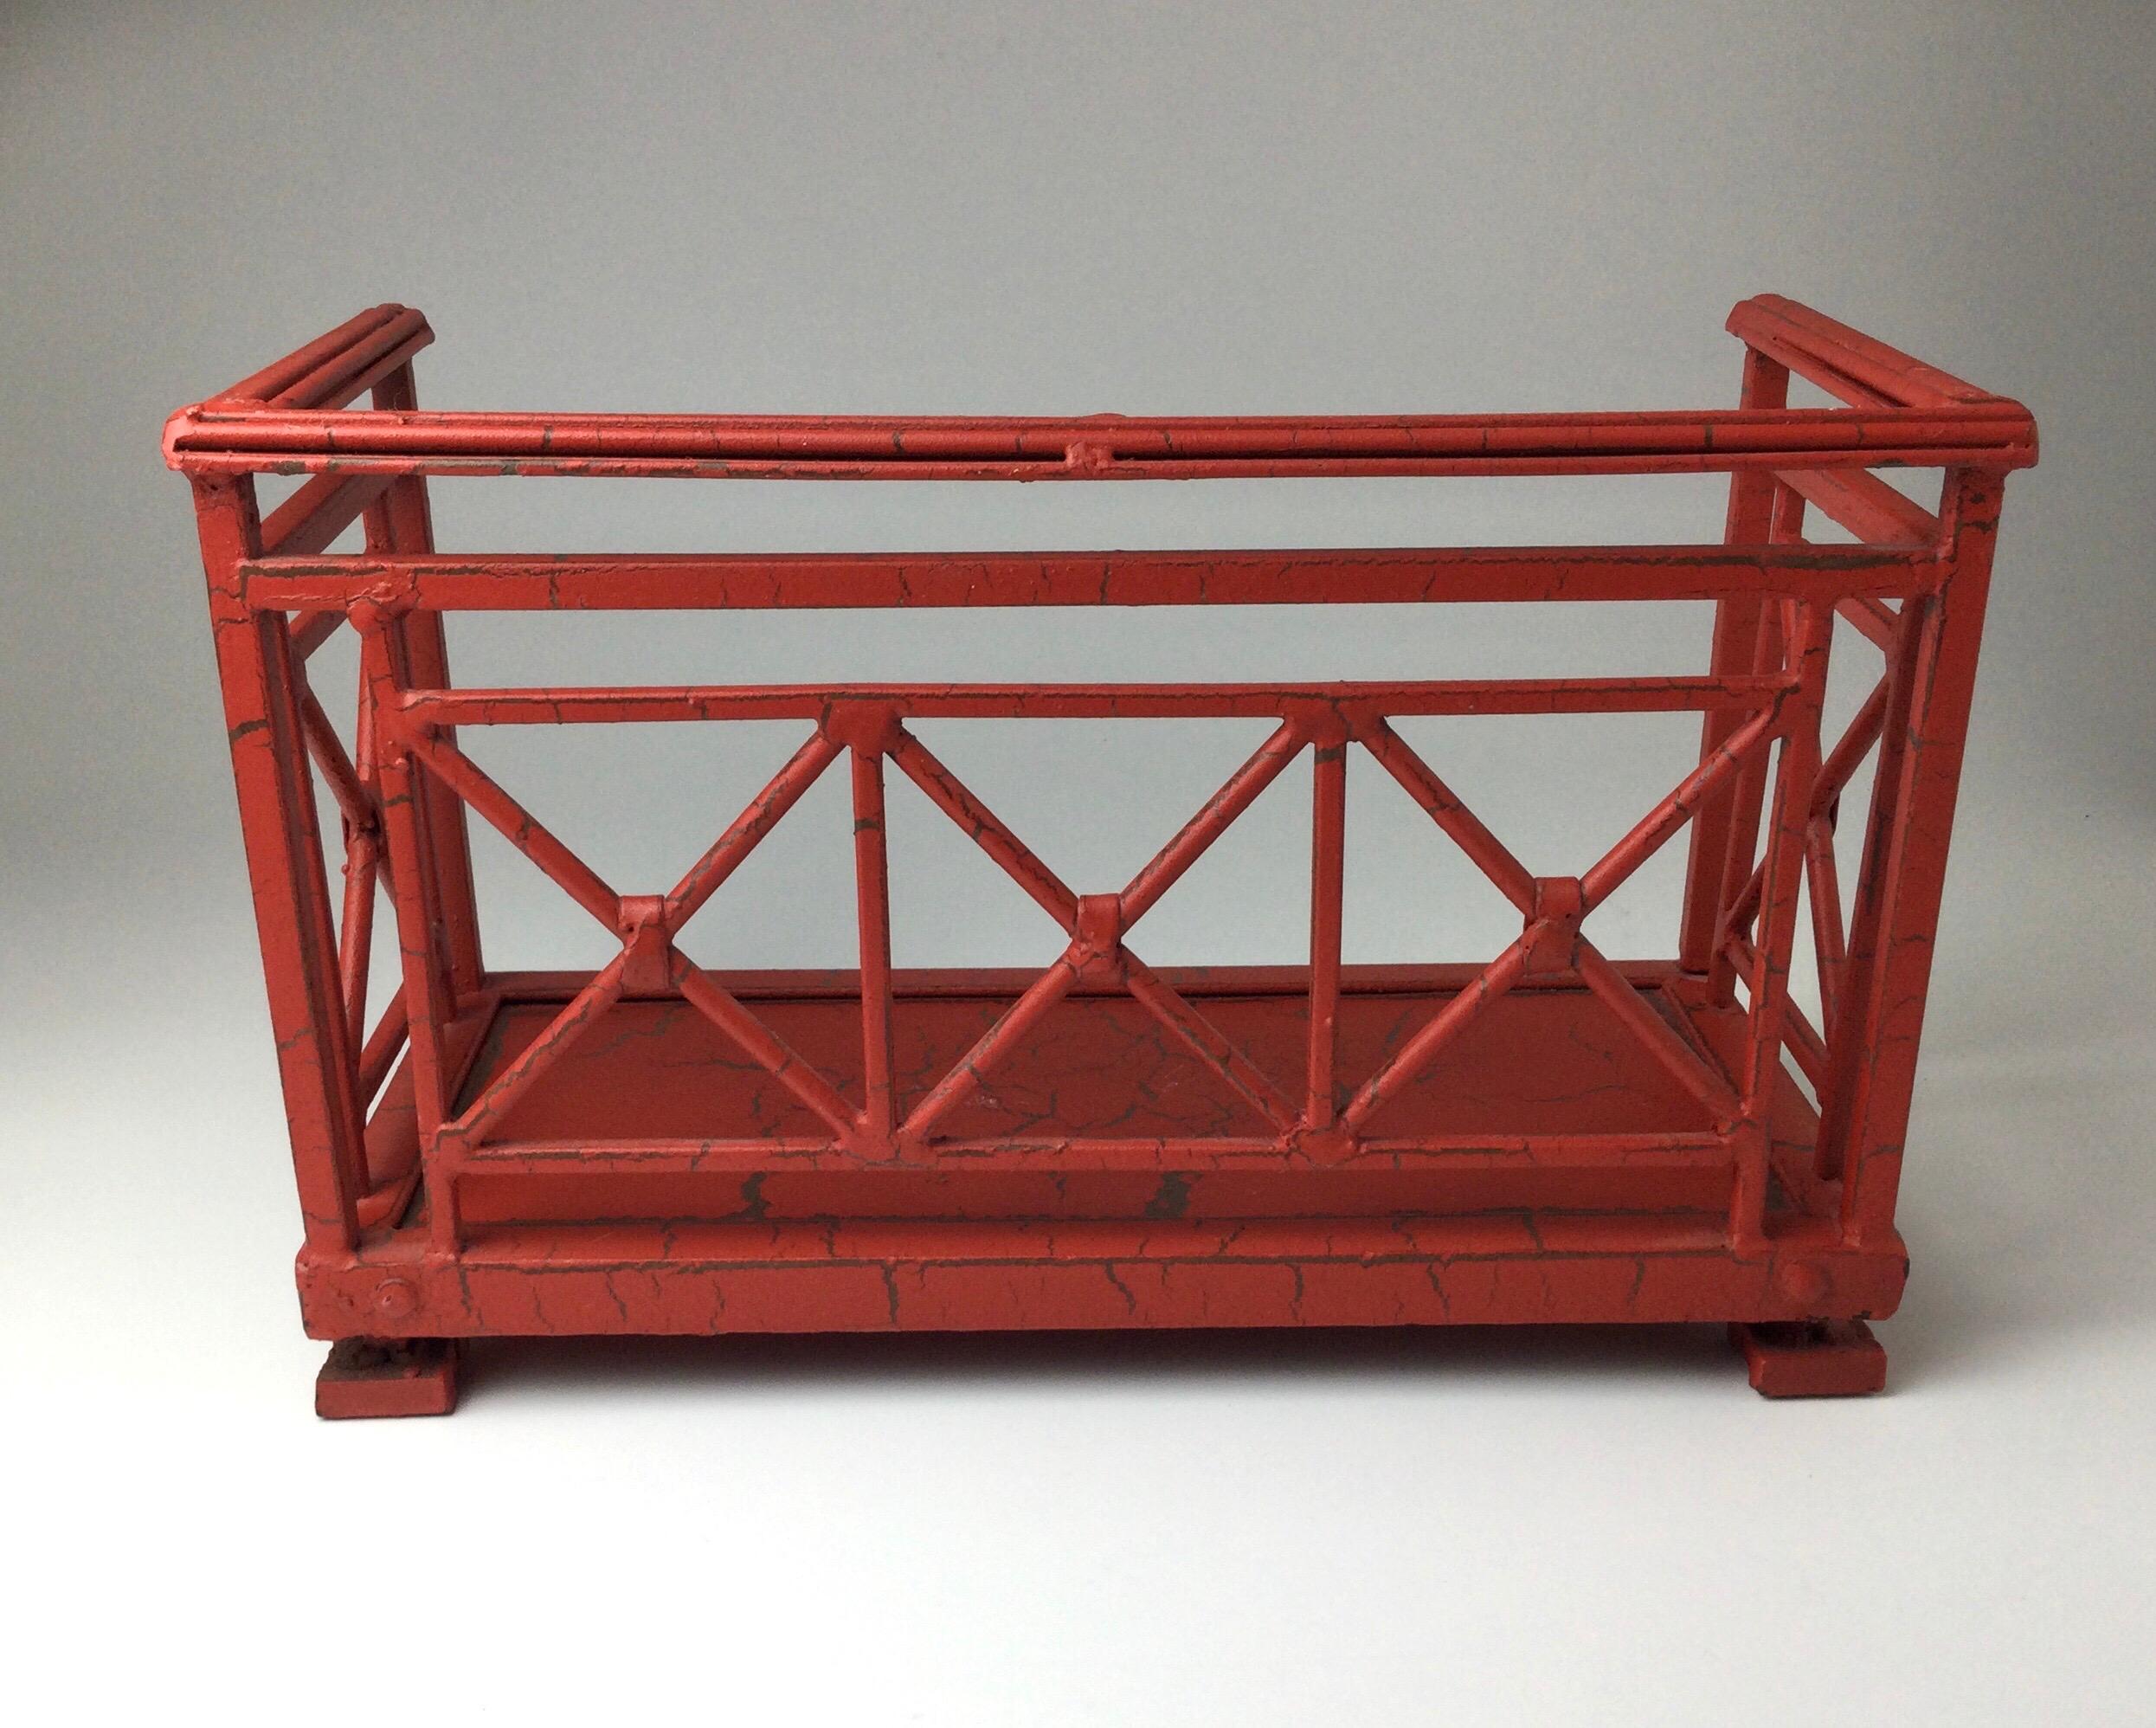 20th Century Orange Red Distressed Painted Metal Tabletop Book Stand Rack